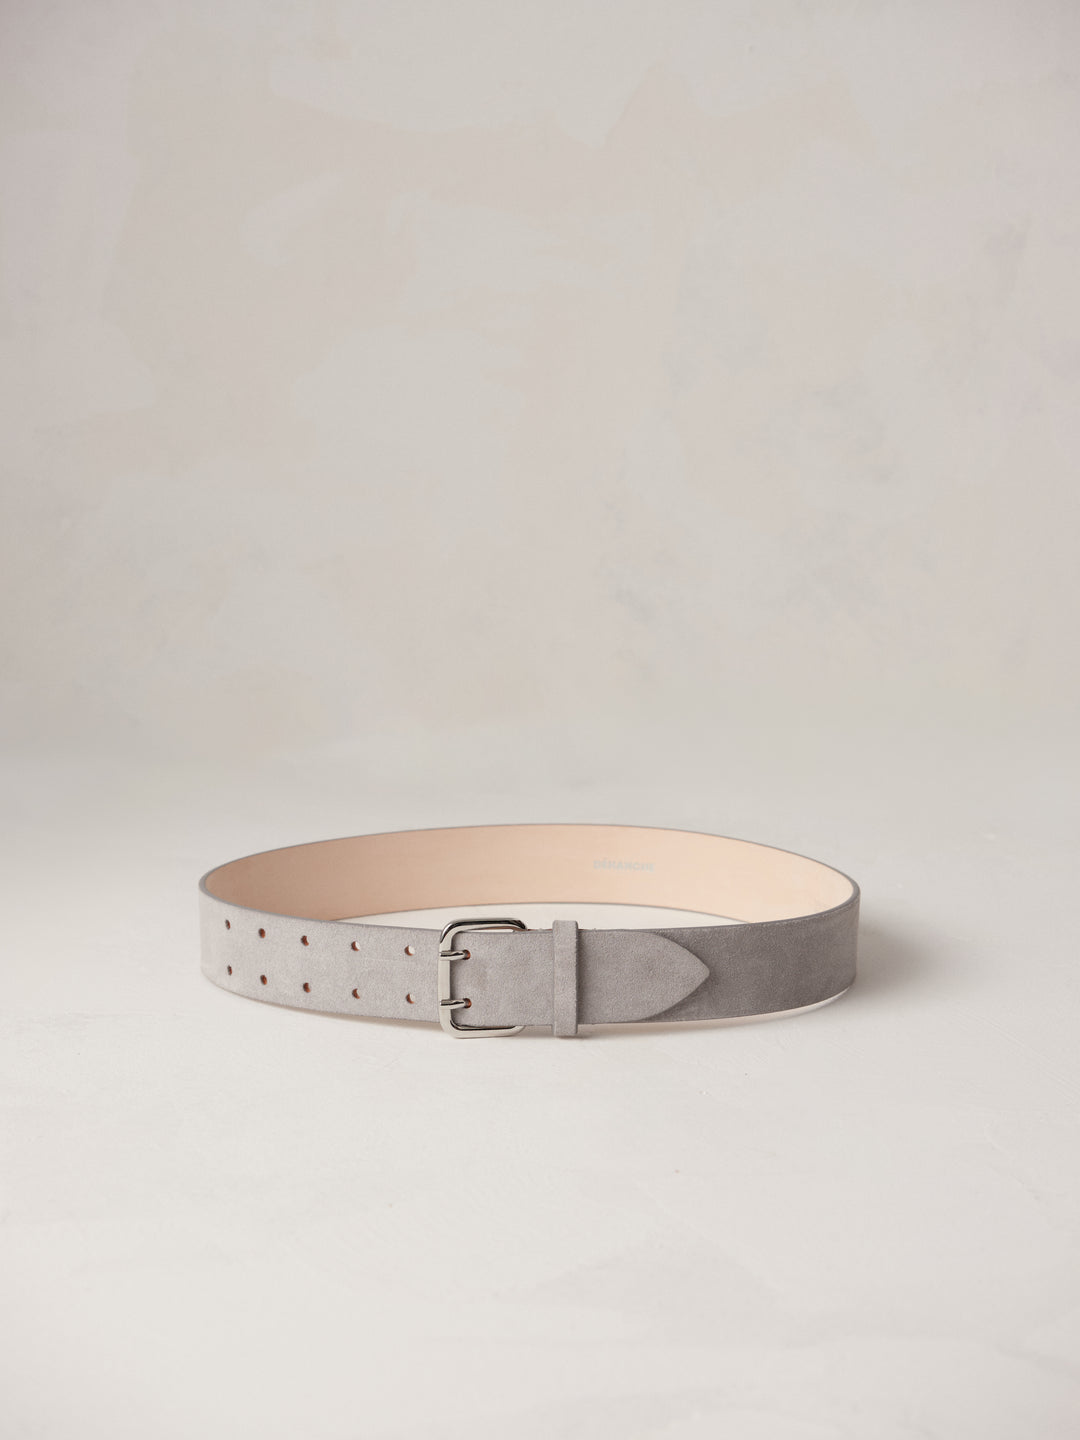 Déhanche hutch suede belt in light grey, elegantly coiled on a neutral background, featuring a sleek silver buckle and premium craftsmanship